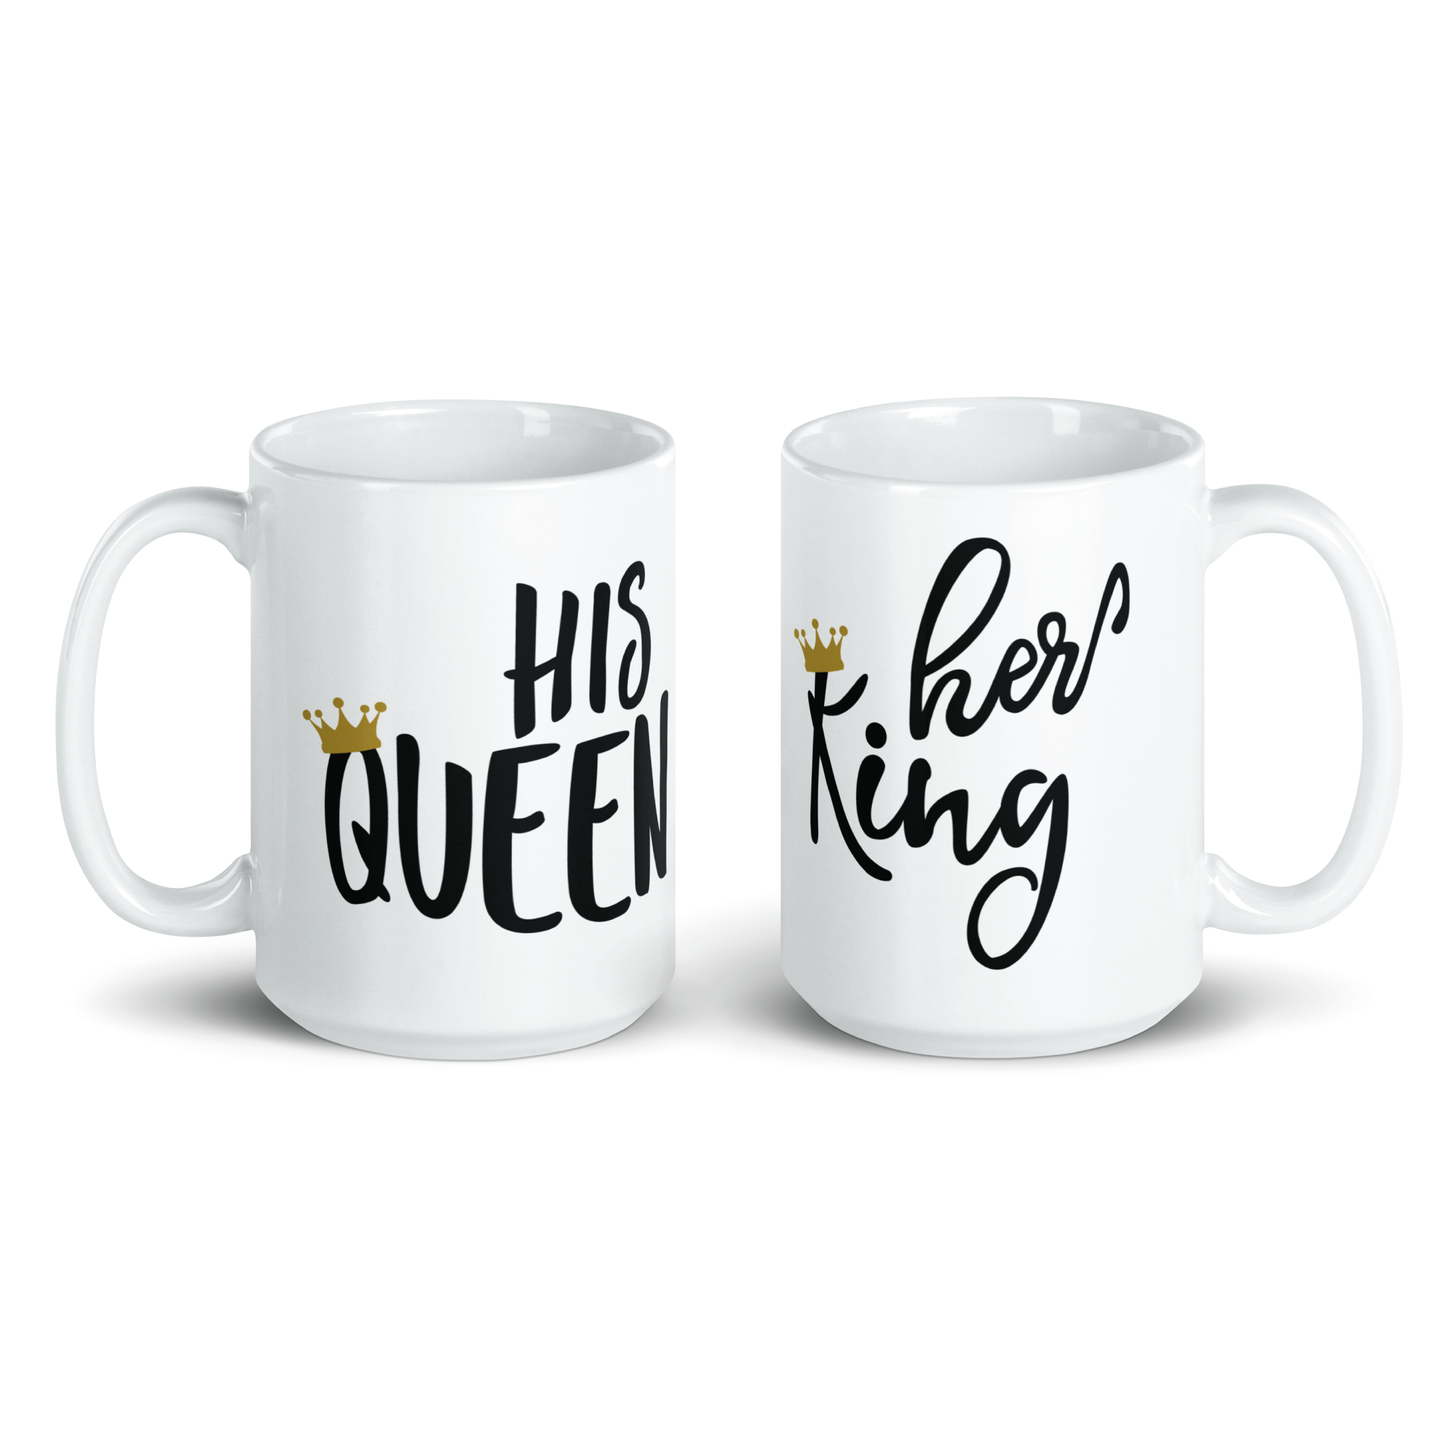 His Queen, Her King Couple Kit Mugs 